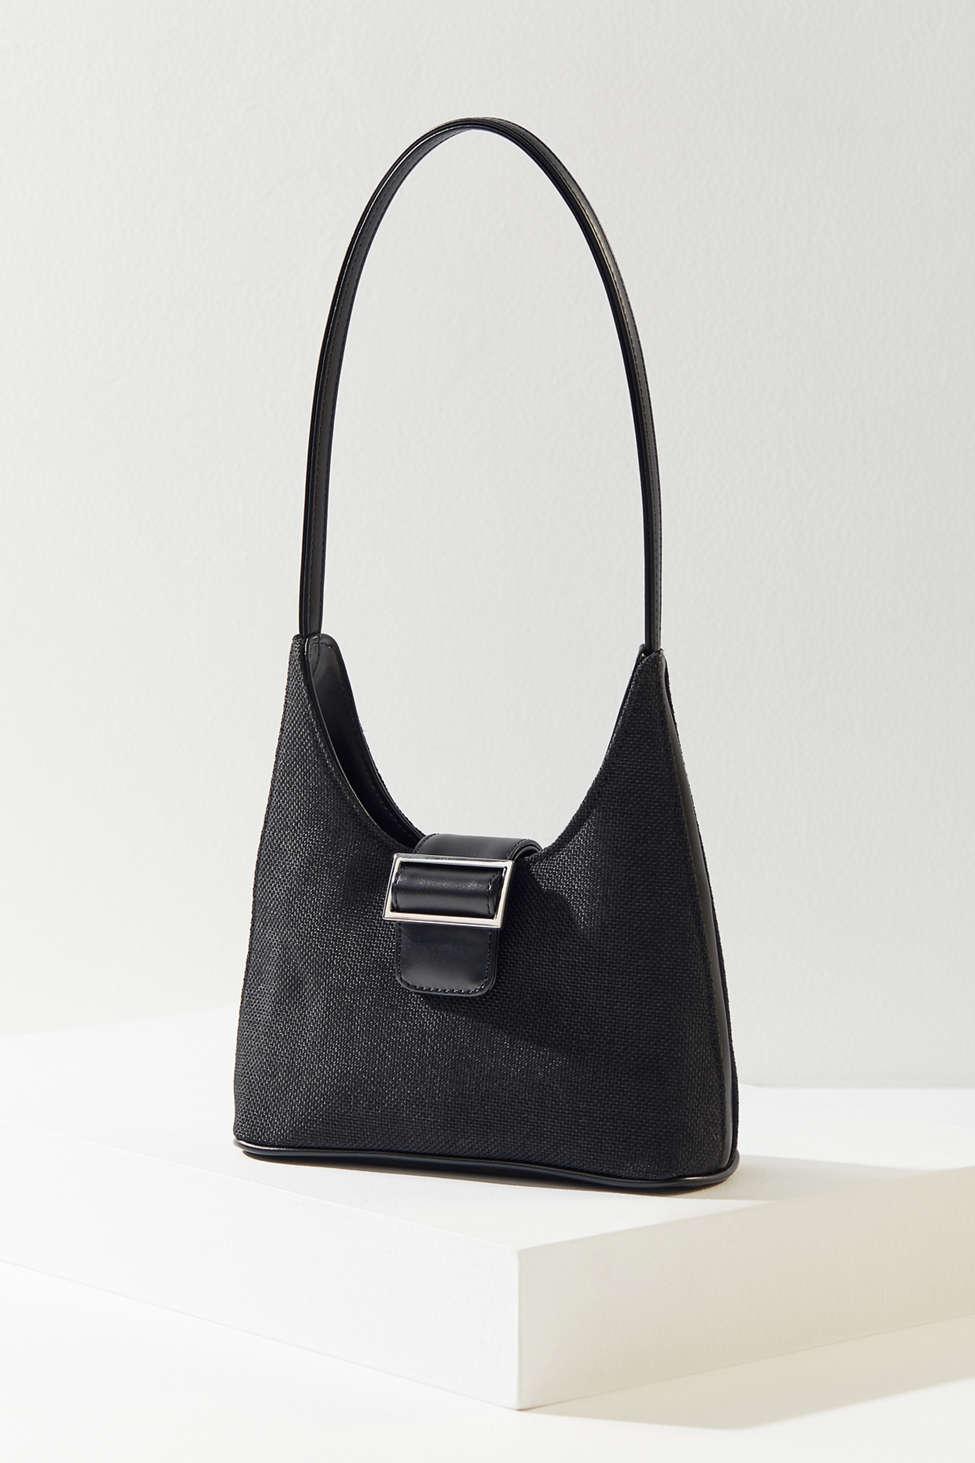 Urban Outfitters Laila Shoulder Bag in Black | Lyst